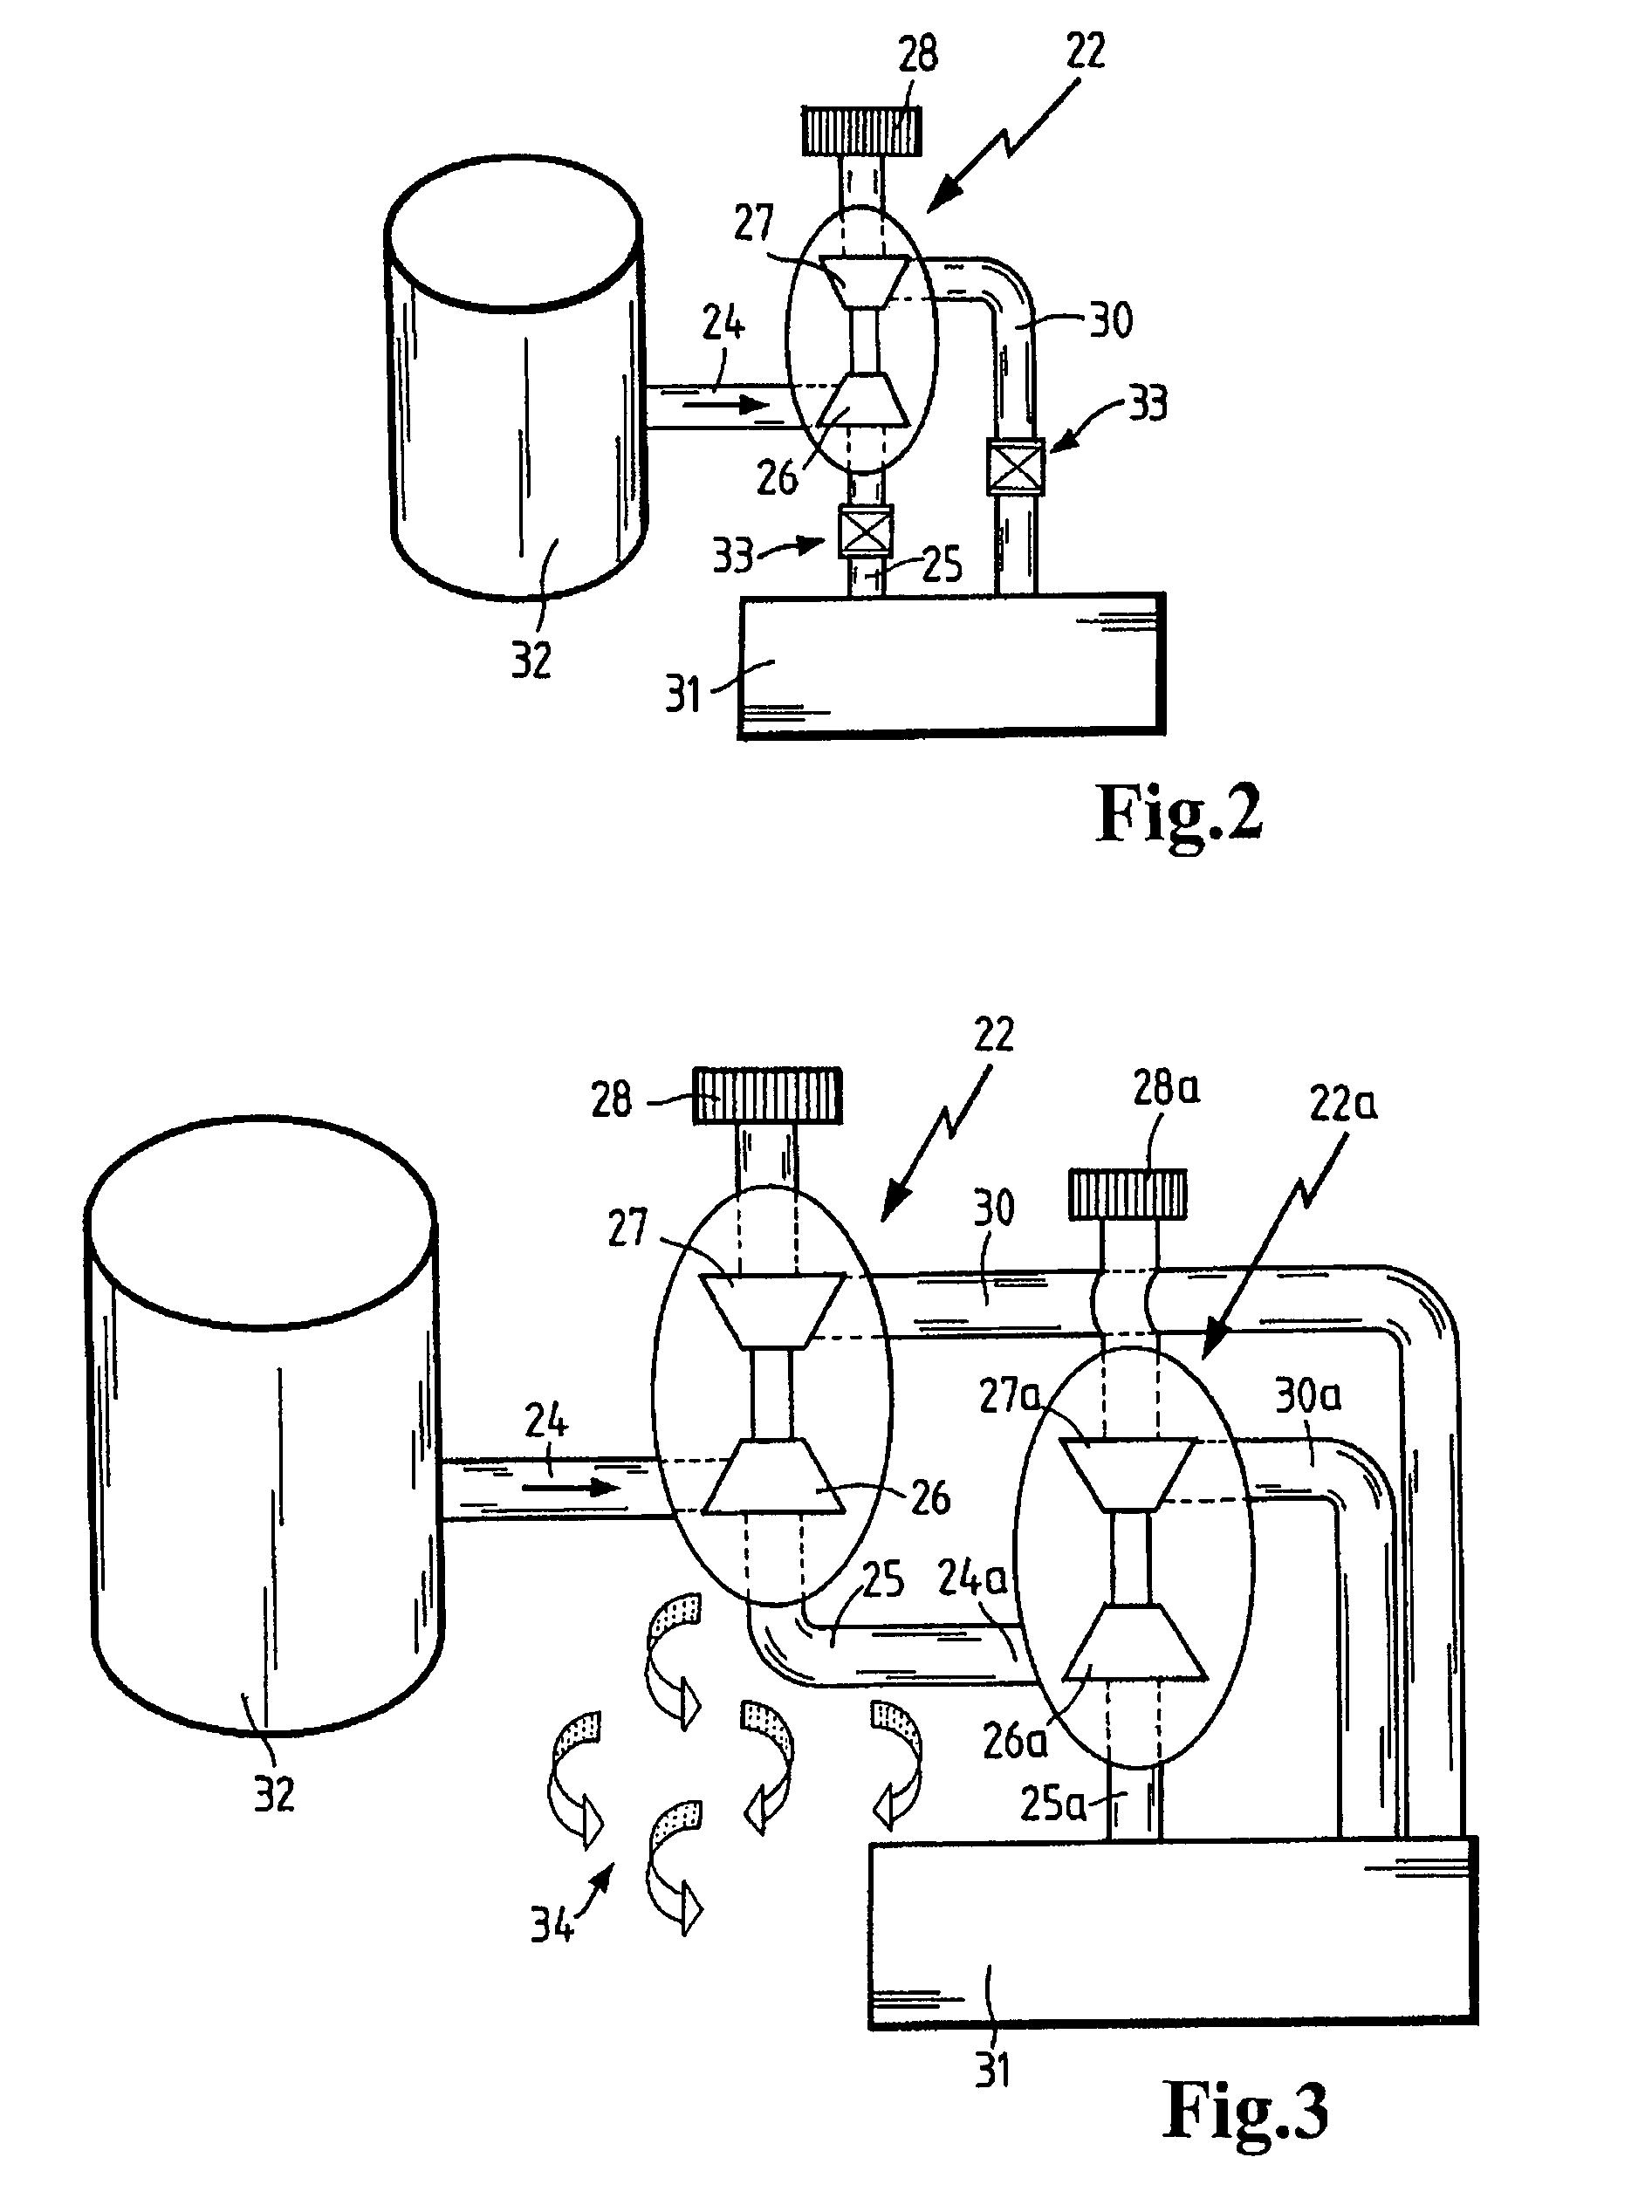 Internal combustion engine with secondary air injection system